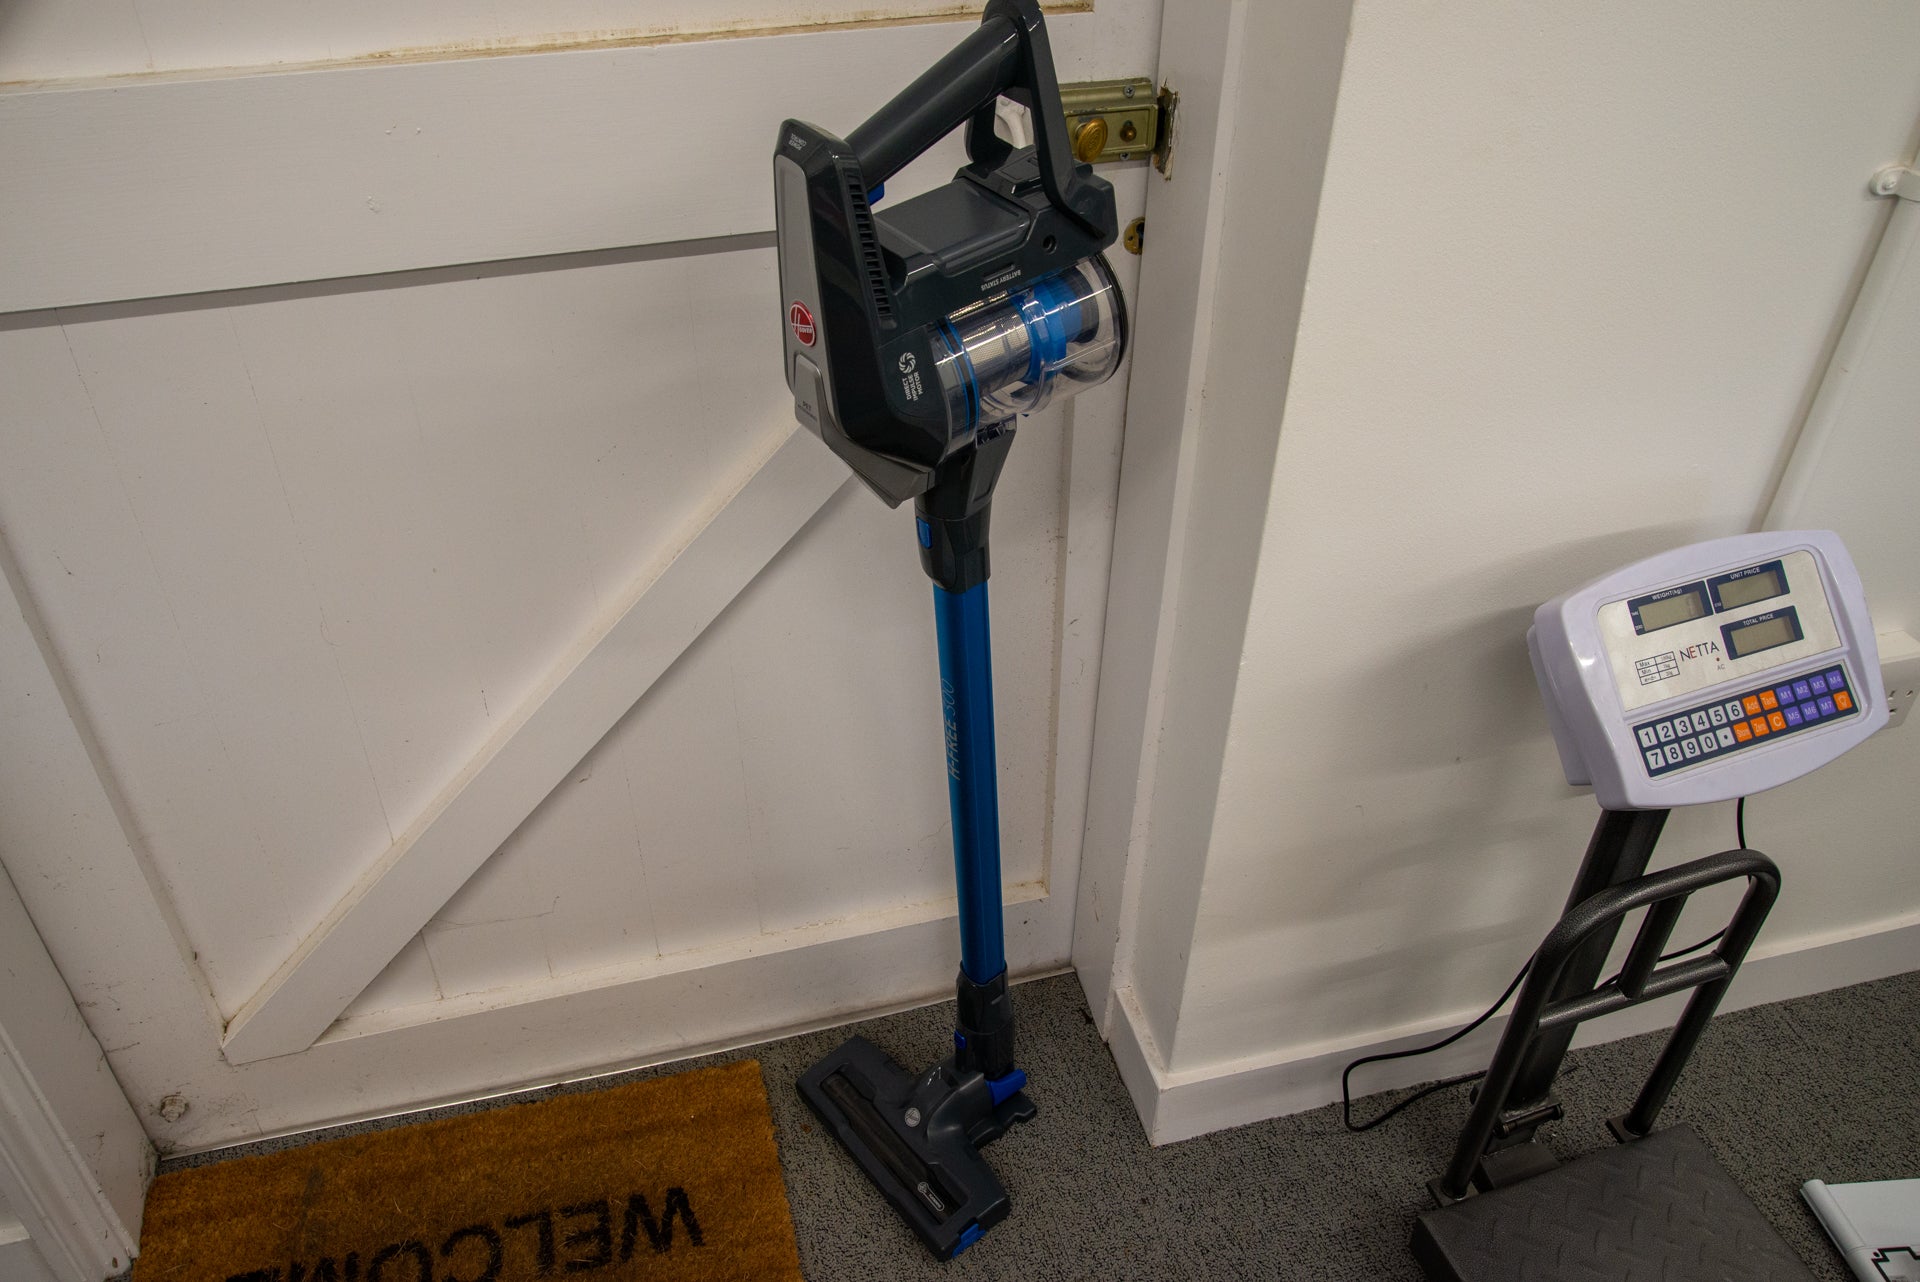 Hoover H-Free 300 standing up by itself